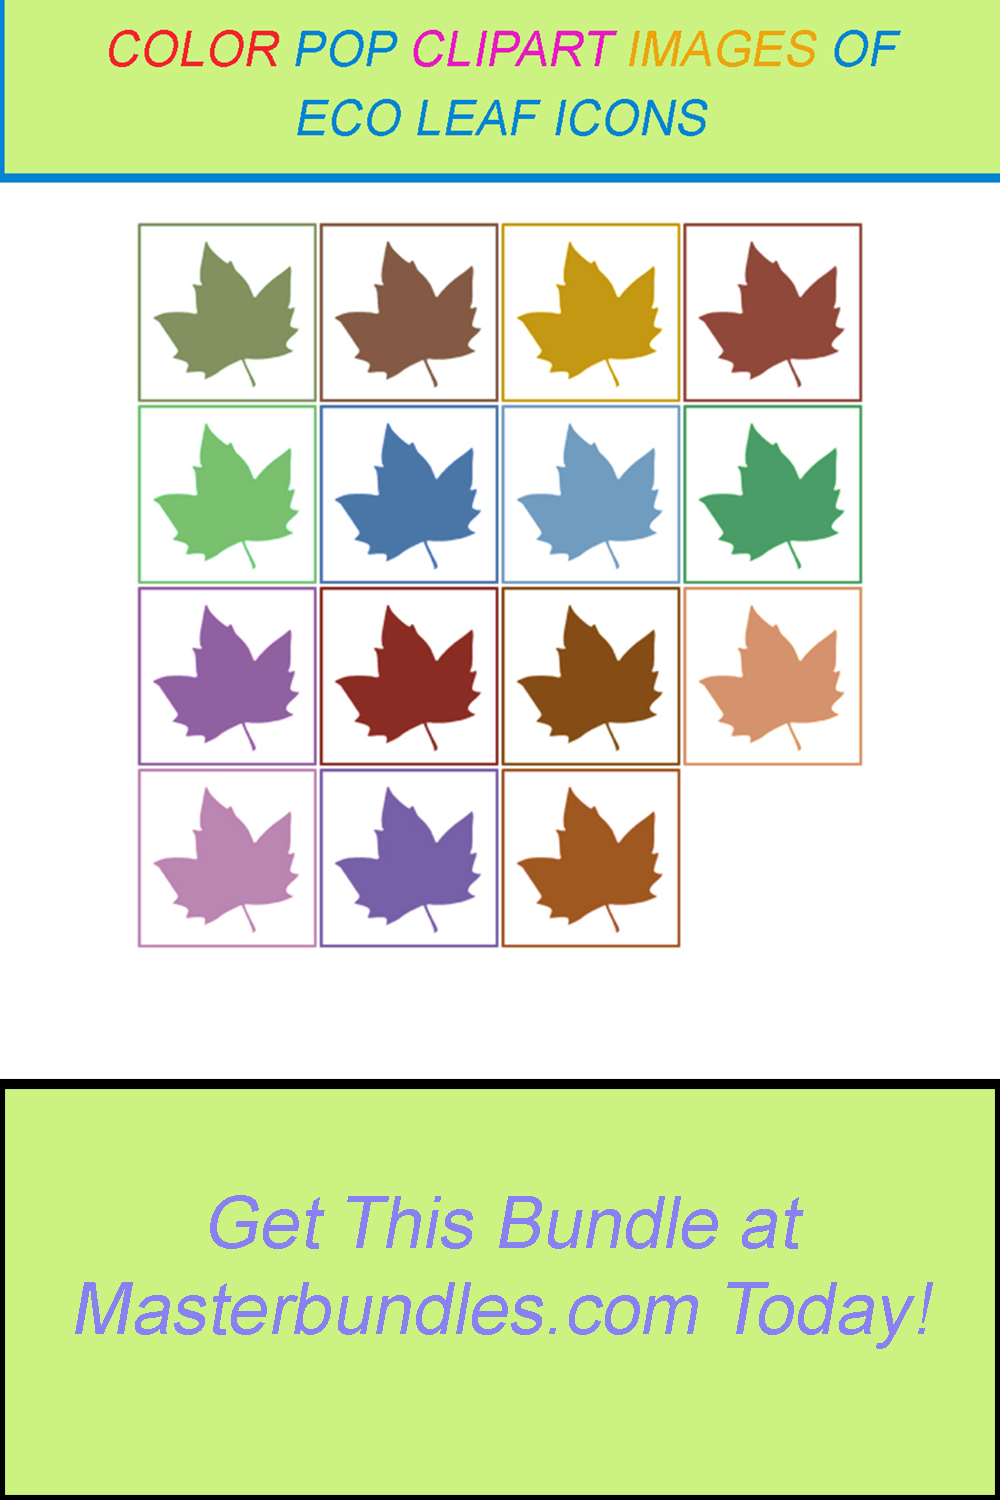 15 COLOR POP CLIPART IMAGES OF ECO LEAF ICONS pinterest preview image.